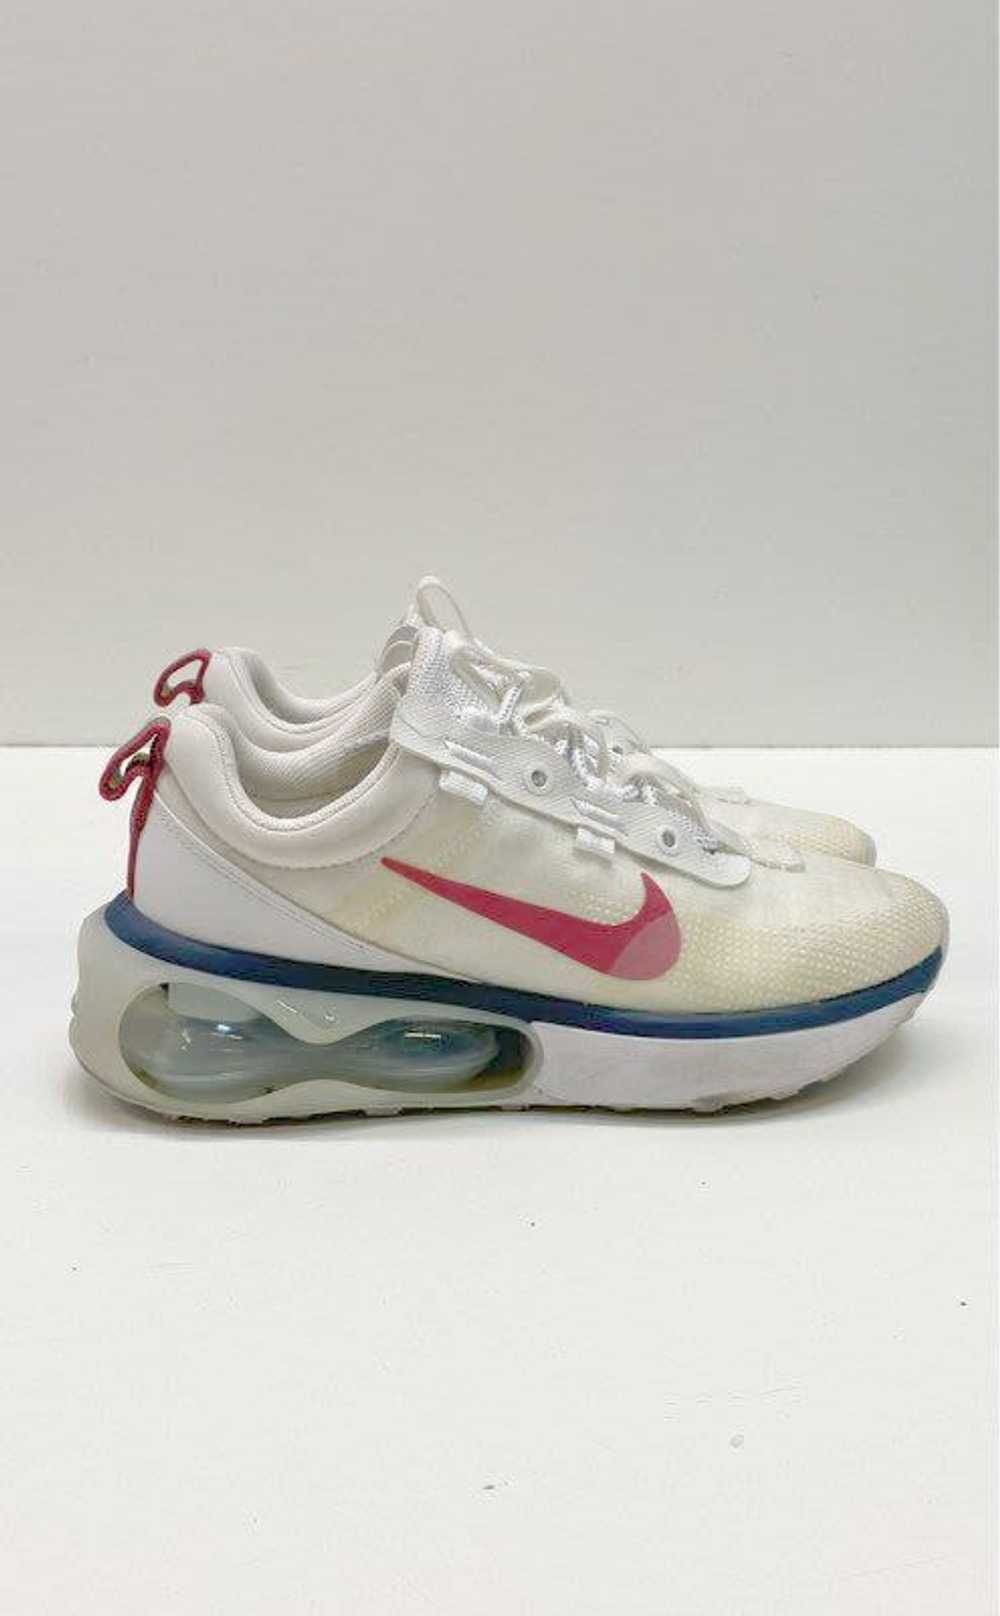 Nike Air Max Sneakers White Gypsy Rose 6.5 - image 1